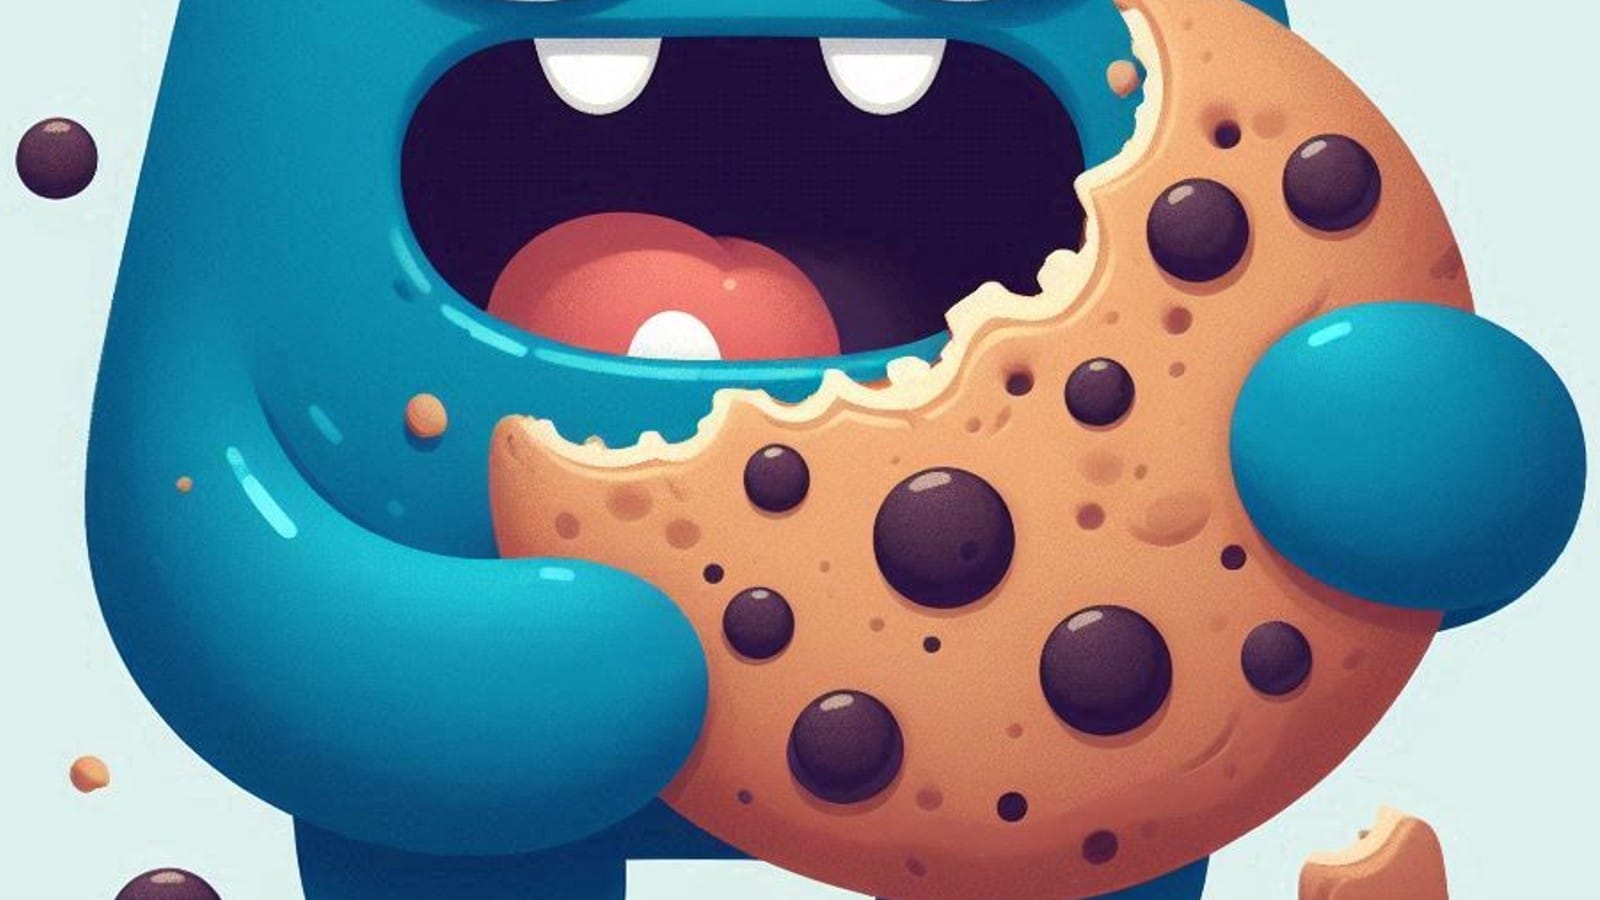 Teads: Nearly half of ad impressions handled are already cookieless